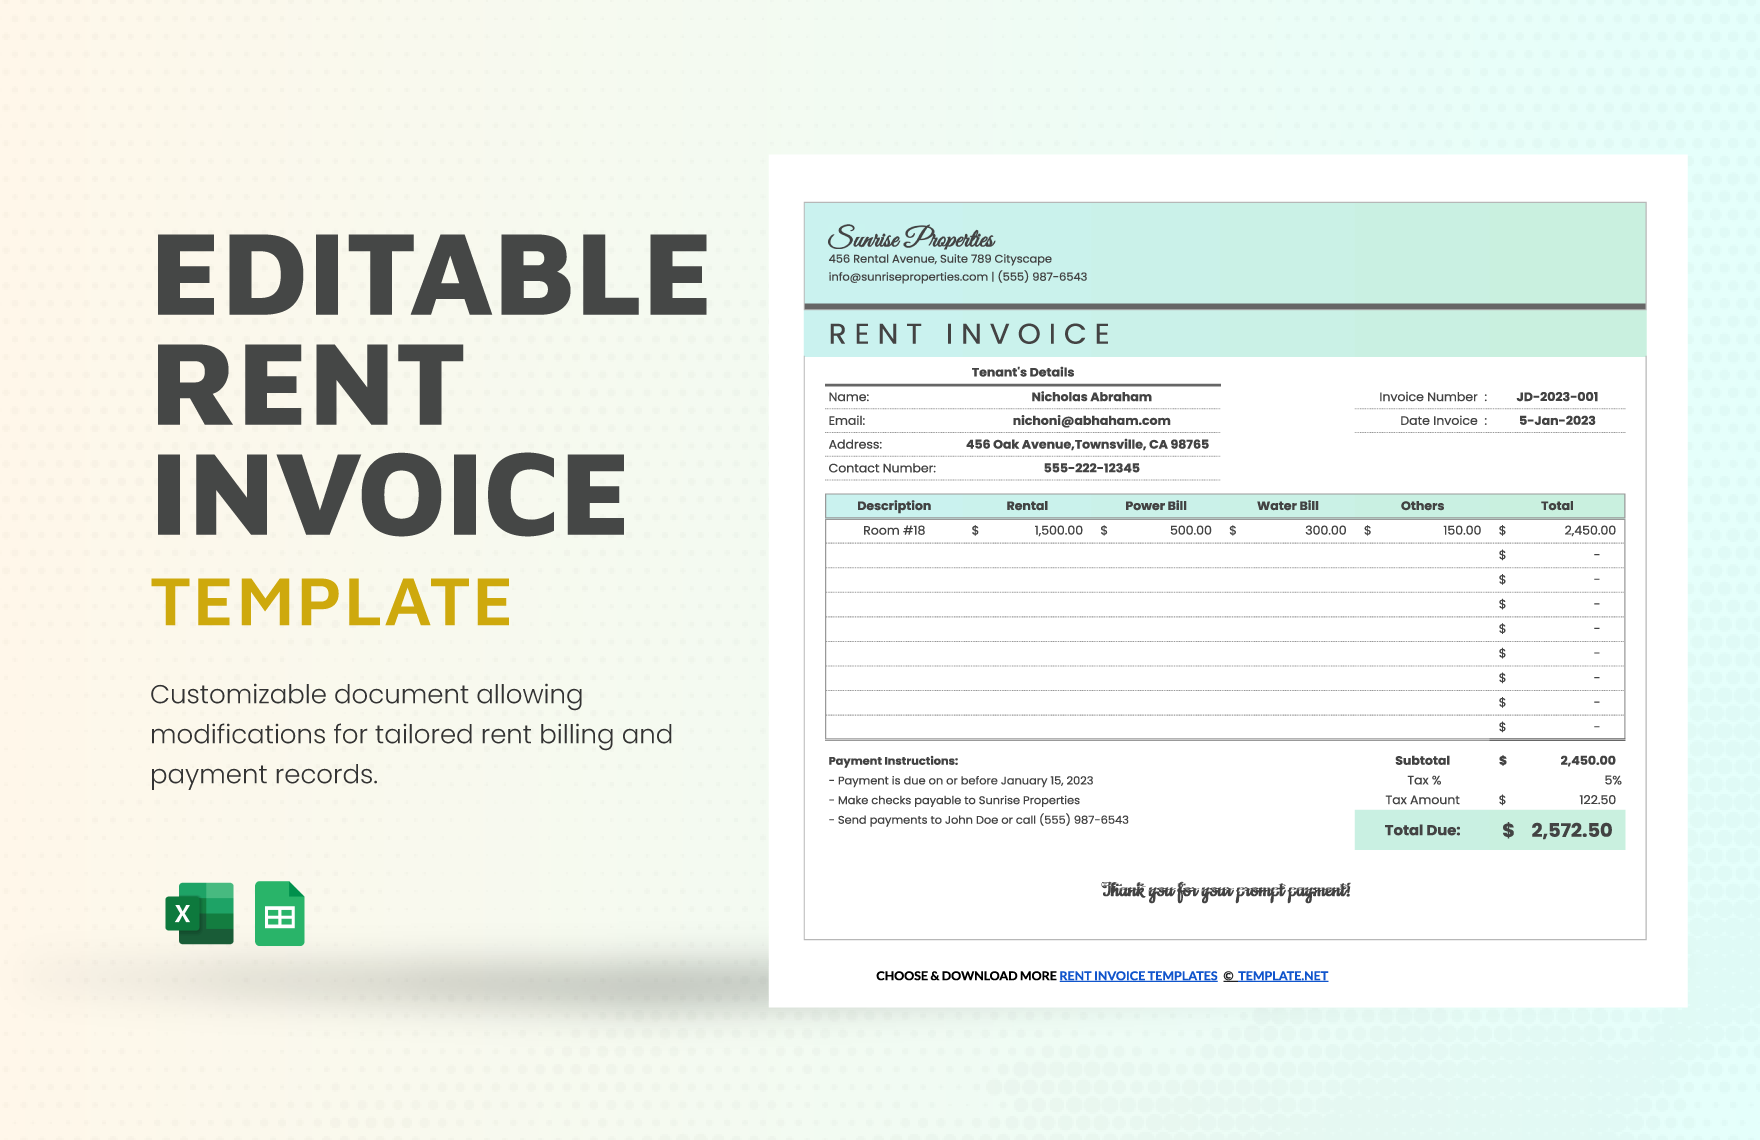 Free Editable Rent Invoice Template in Excel, Google Sheets